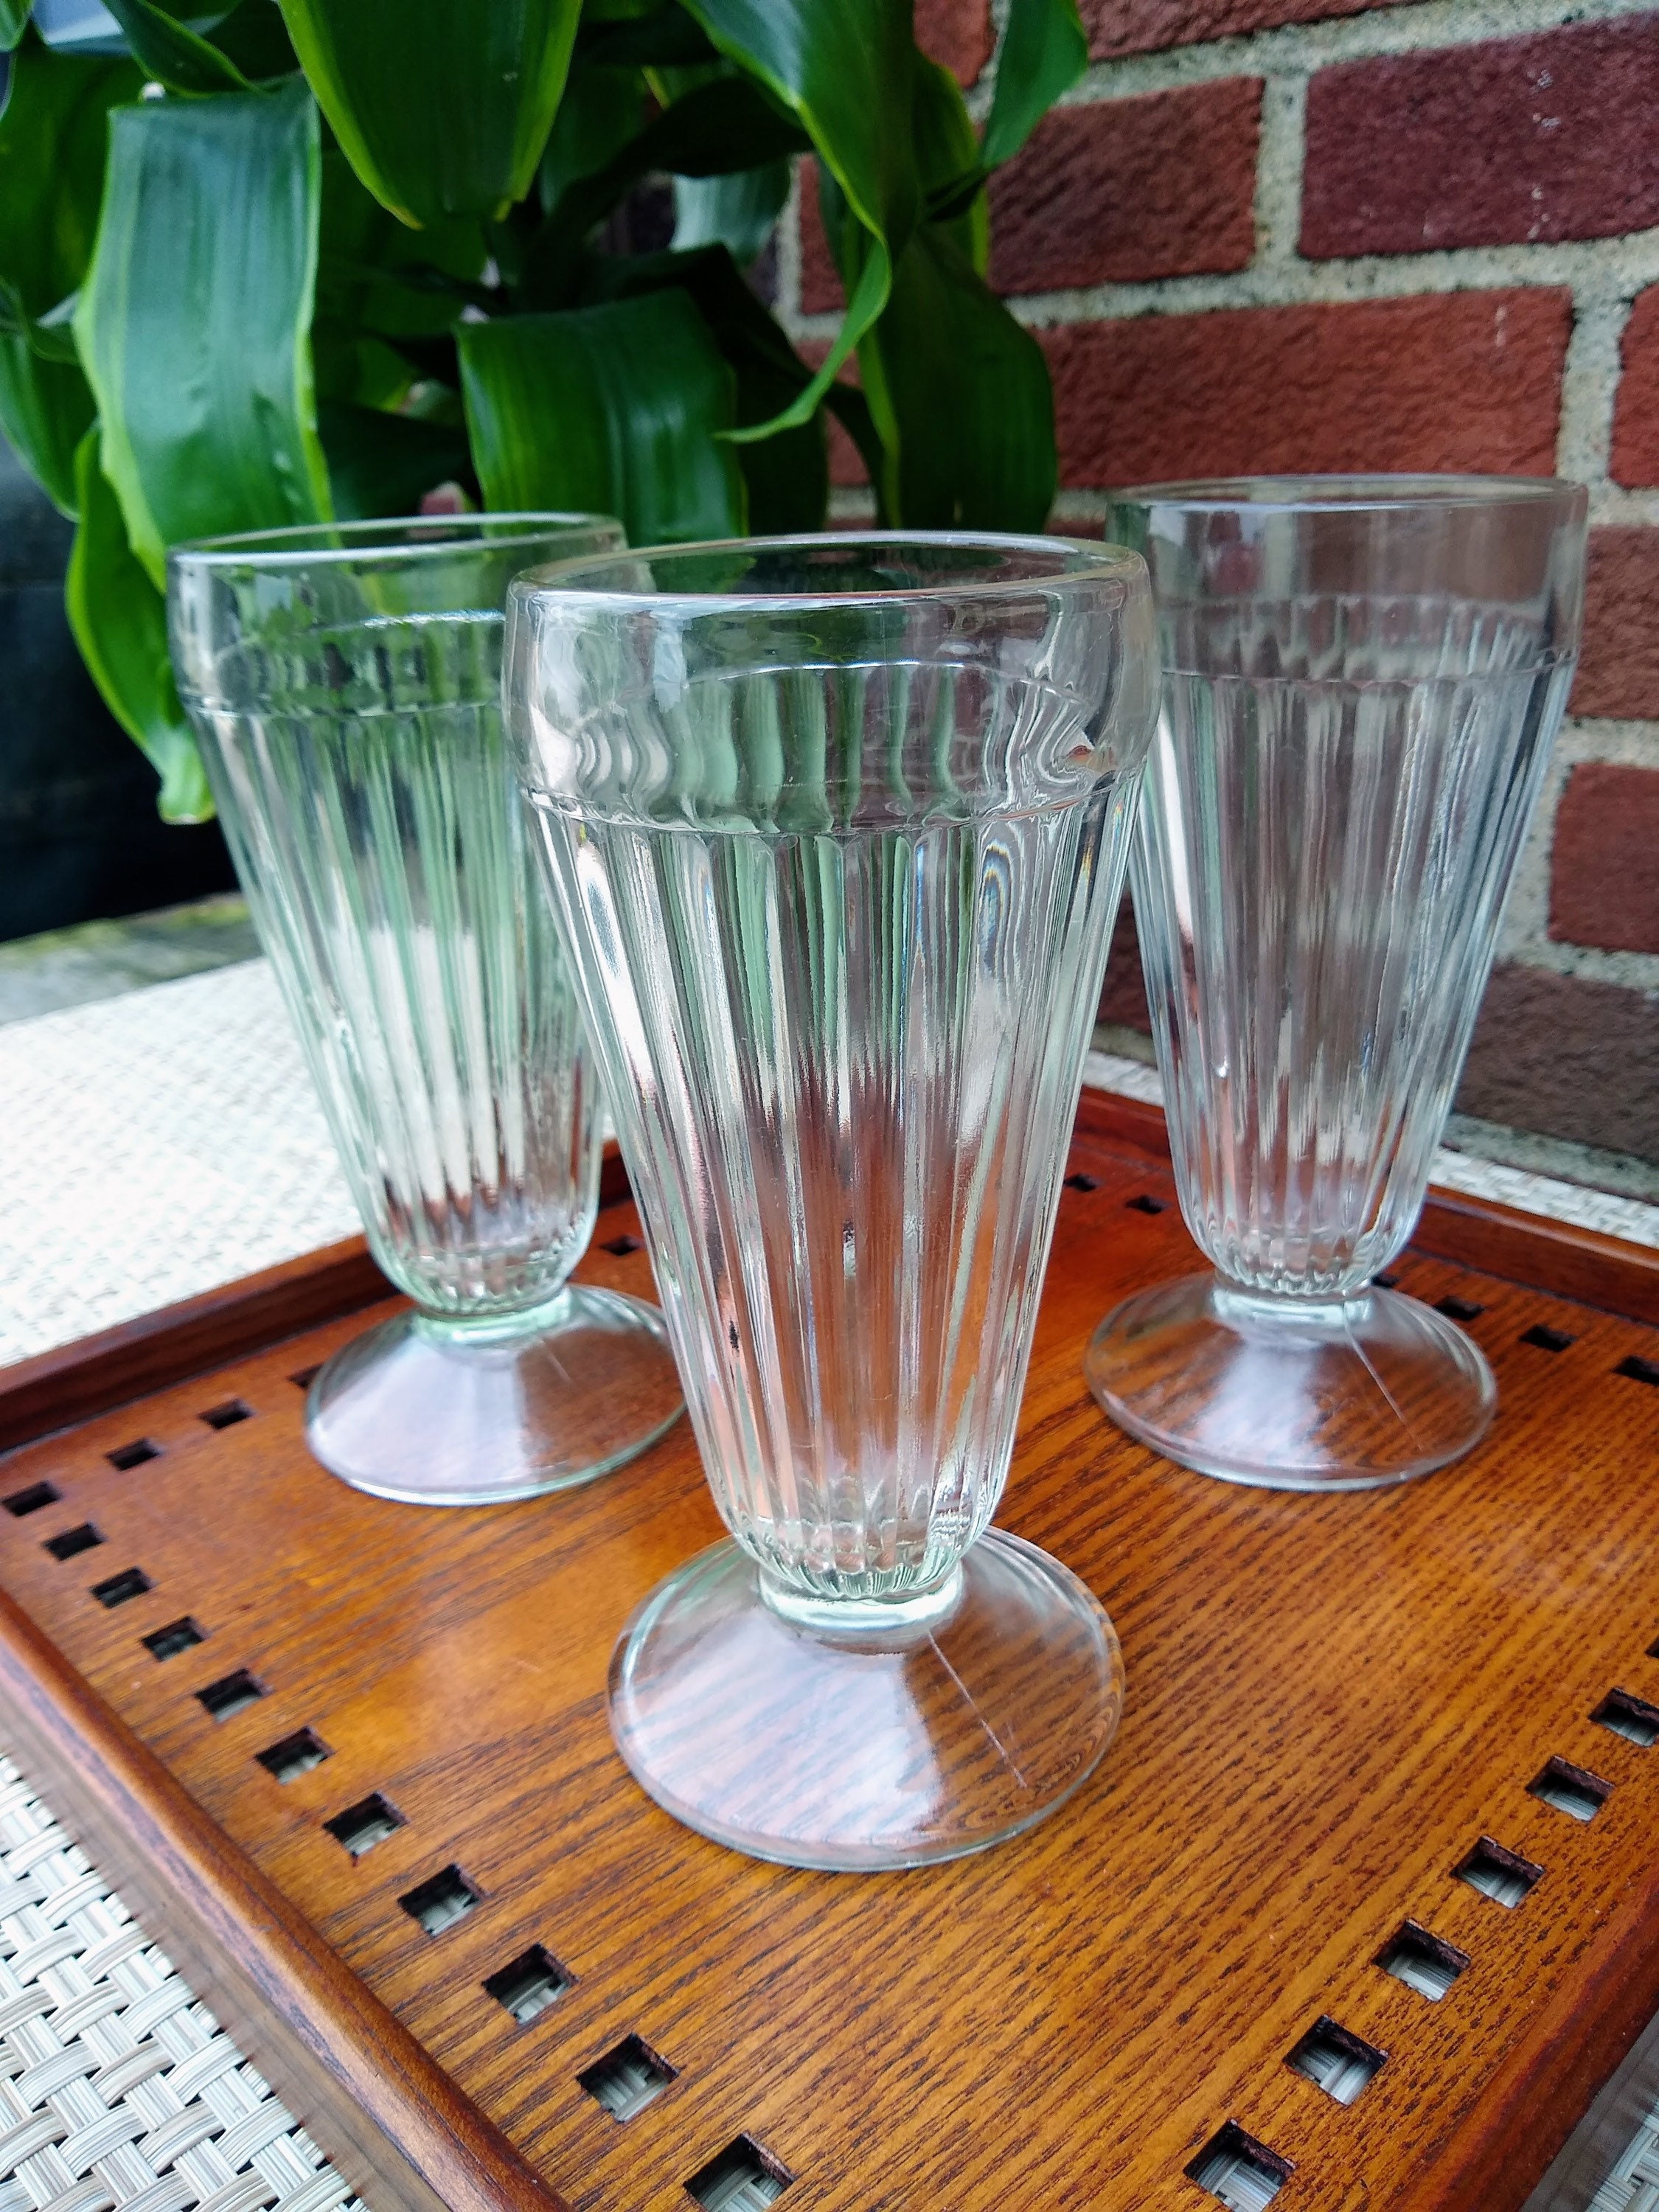 ZMOWIPDL Ribbed Glassware Vintage Drinking Glasses with Straws Set